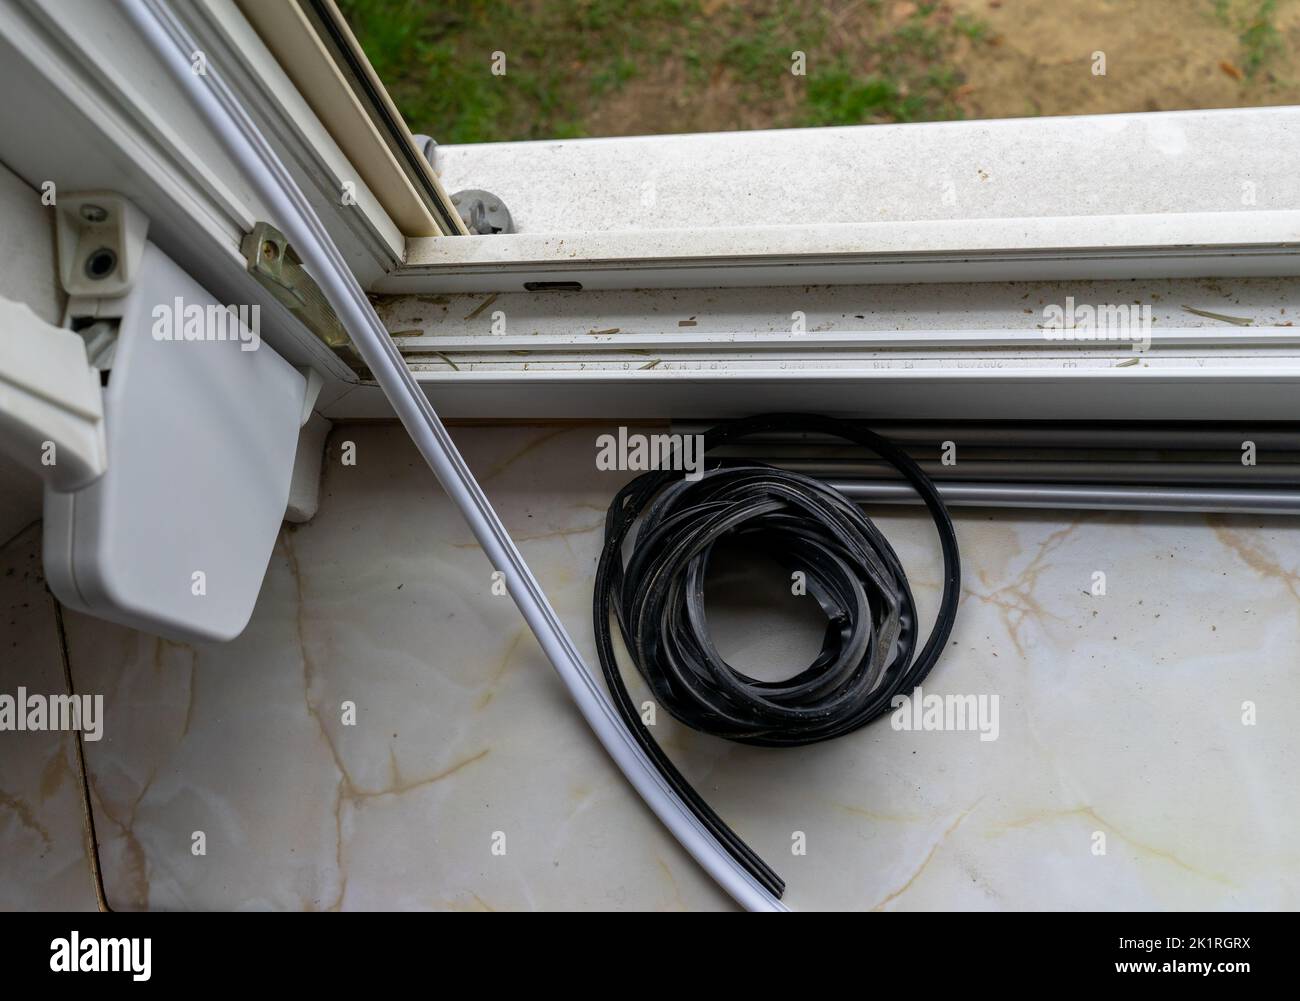 Replace rubber seal on window Stock Photo